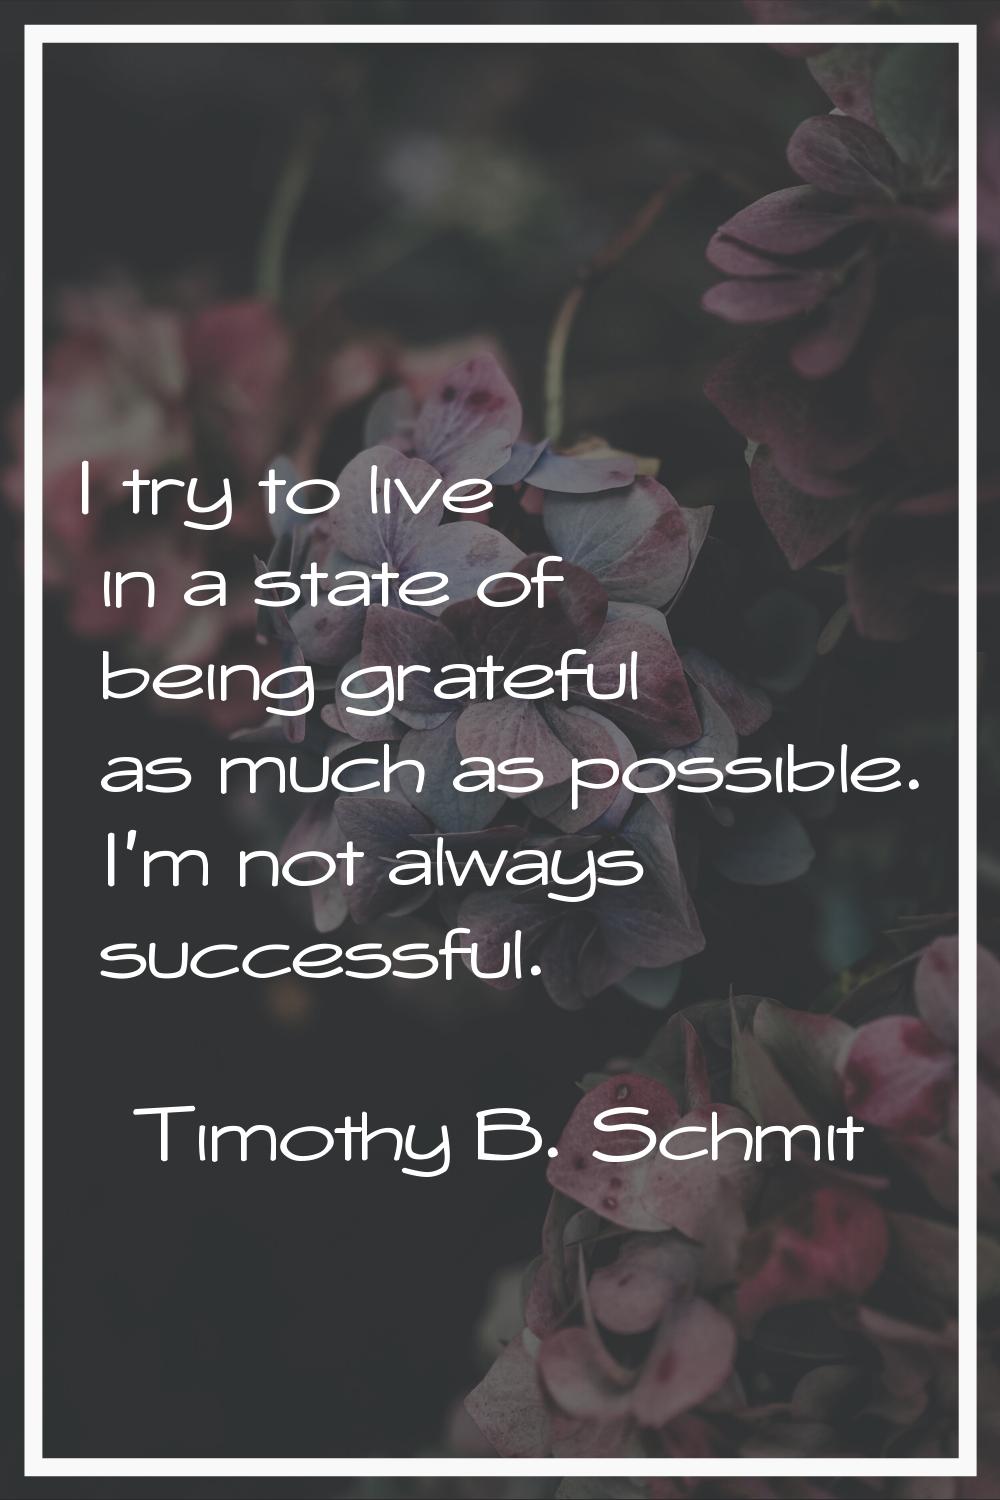 I try to live in a state of being grateful as much as possible. I'm not always successful.